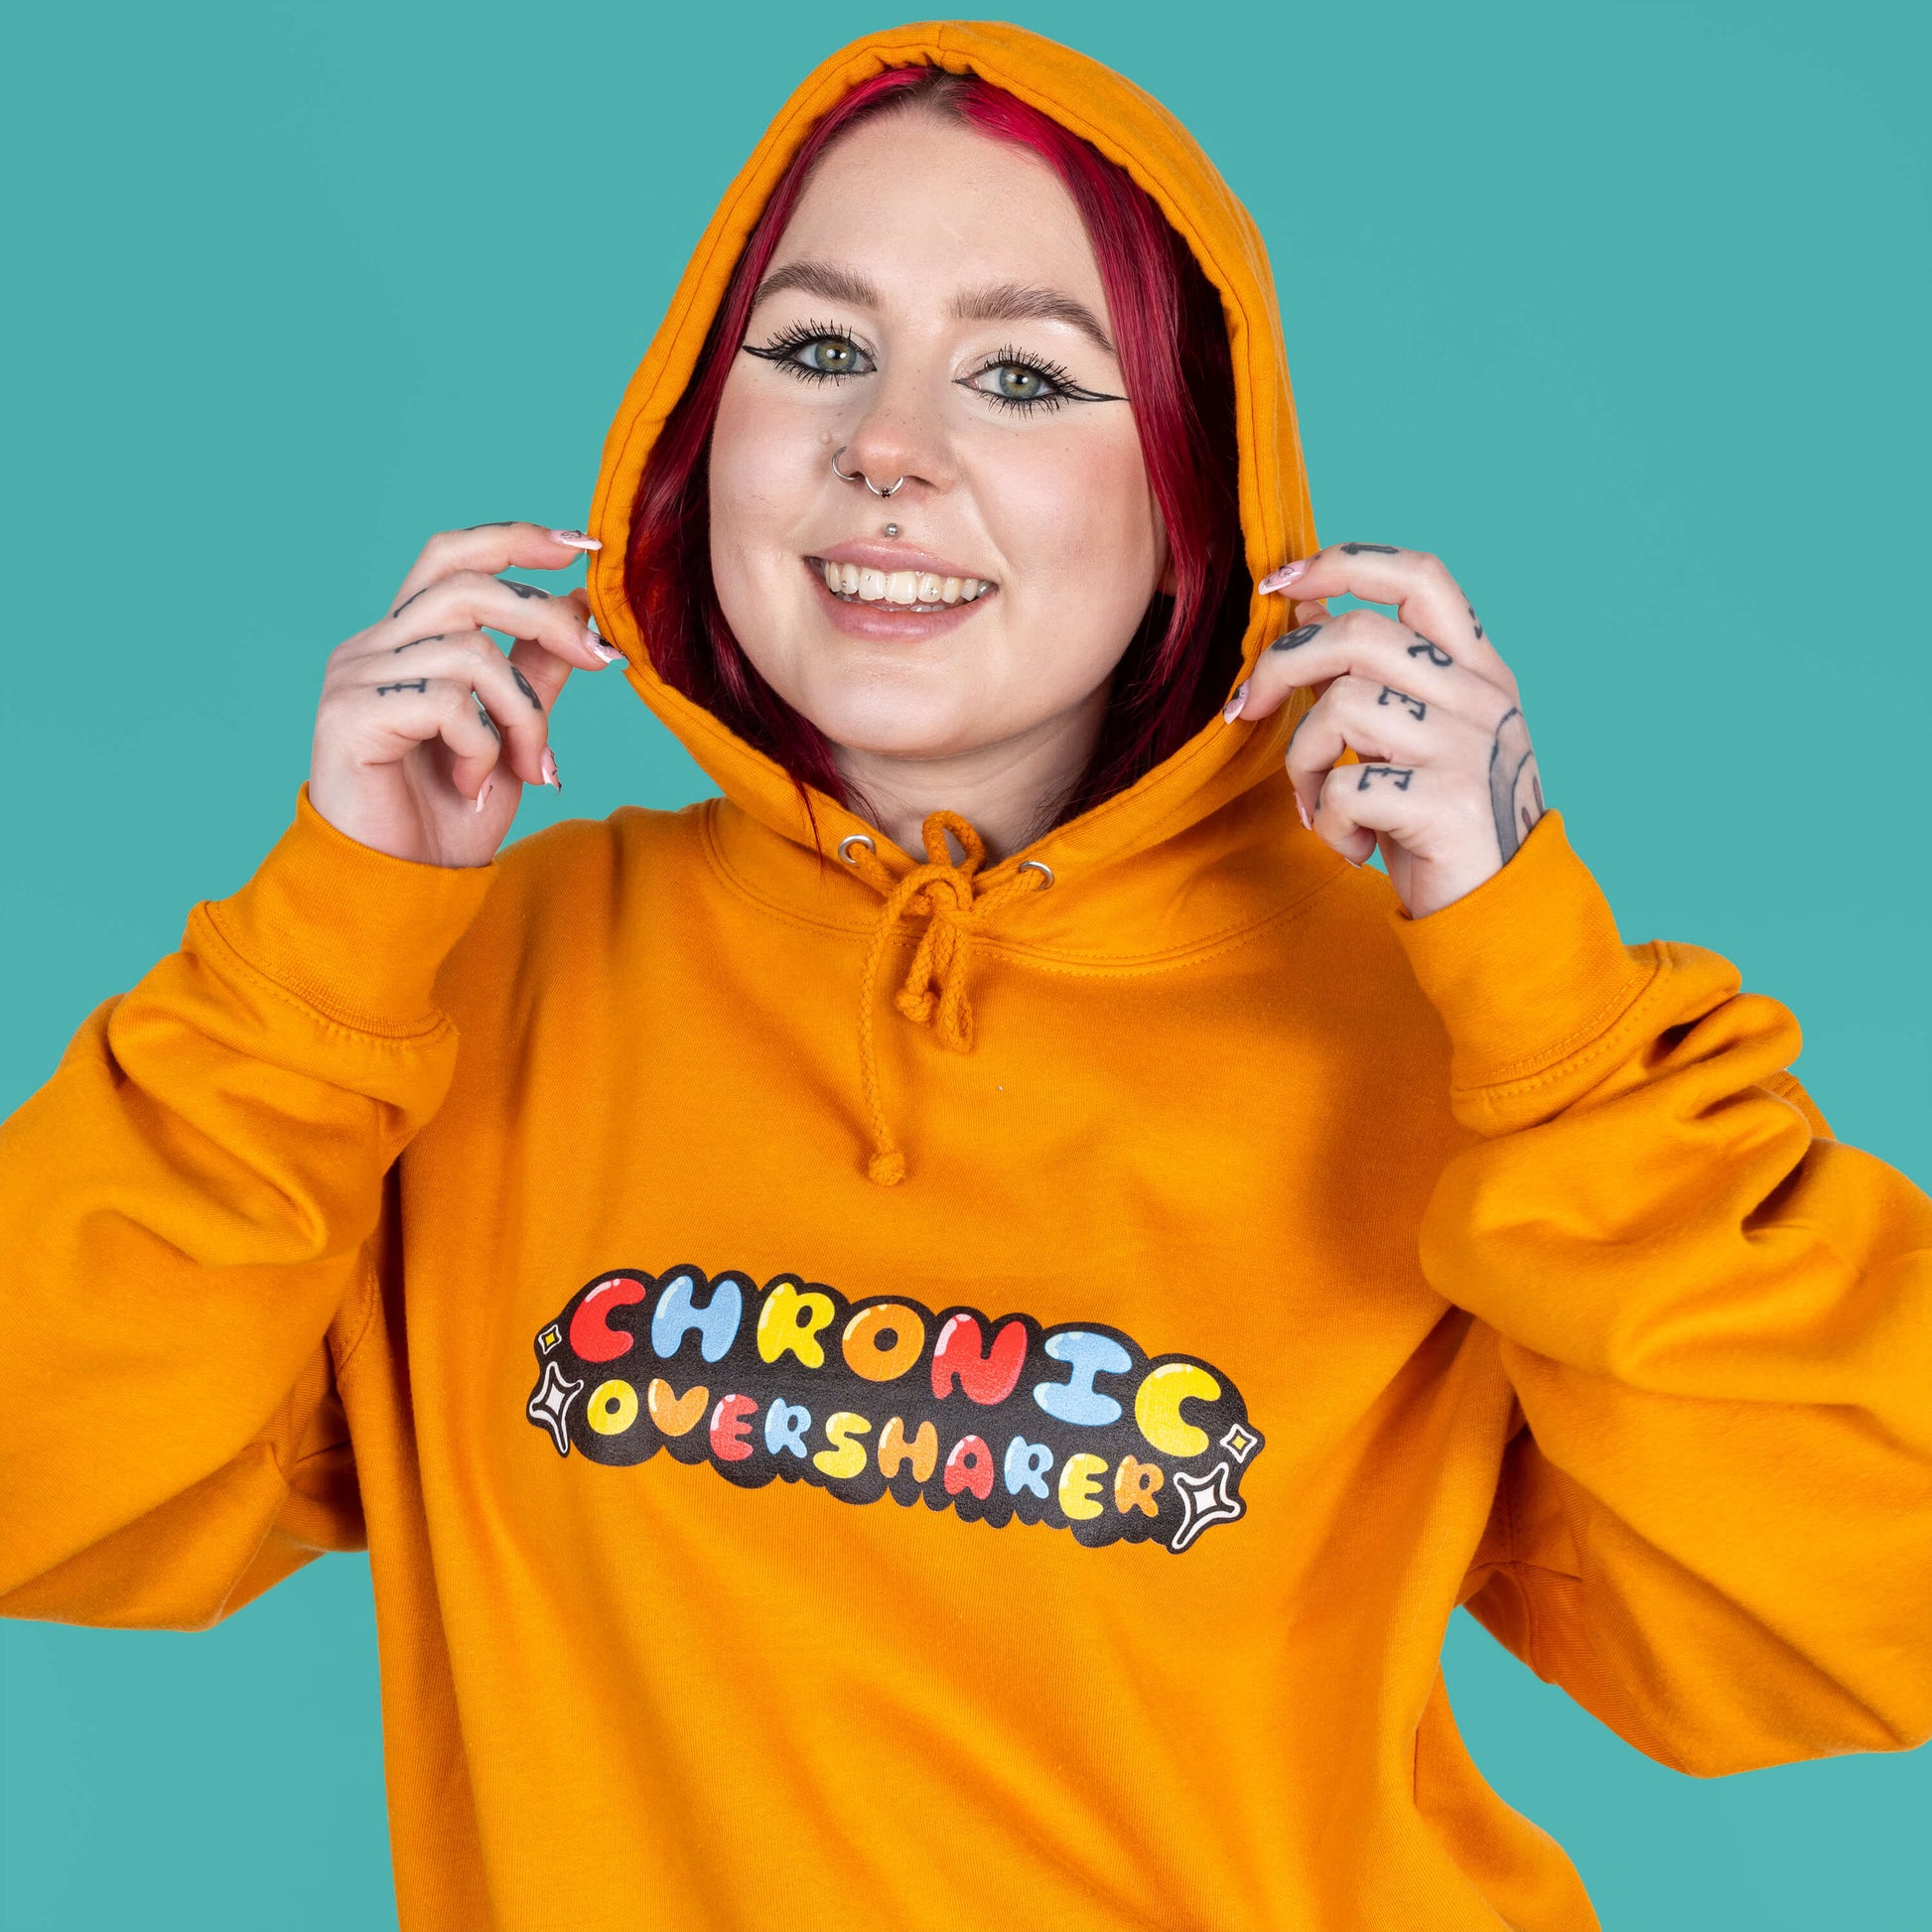 The Chronic Over Sharer Pumpkin Orange Hoodie modelled on Flo, a red haired alternative model, in front of a blue background. She is facing forward smiling with both hands resting on the hood up, photo is cropped from the waist up. The pumpkin orange hoodie features a drawstring hood, a large front pocket and the text 'chronic oversharer' in rainbow bubble font with a black shadow effect and white sparkles. The design was created to raise awareness for neurodivergent disorders such as ADHD.